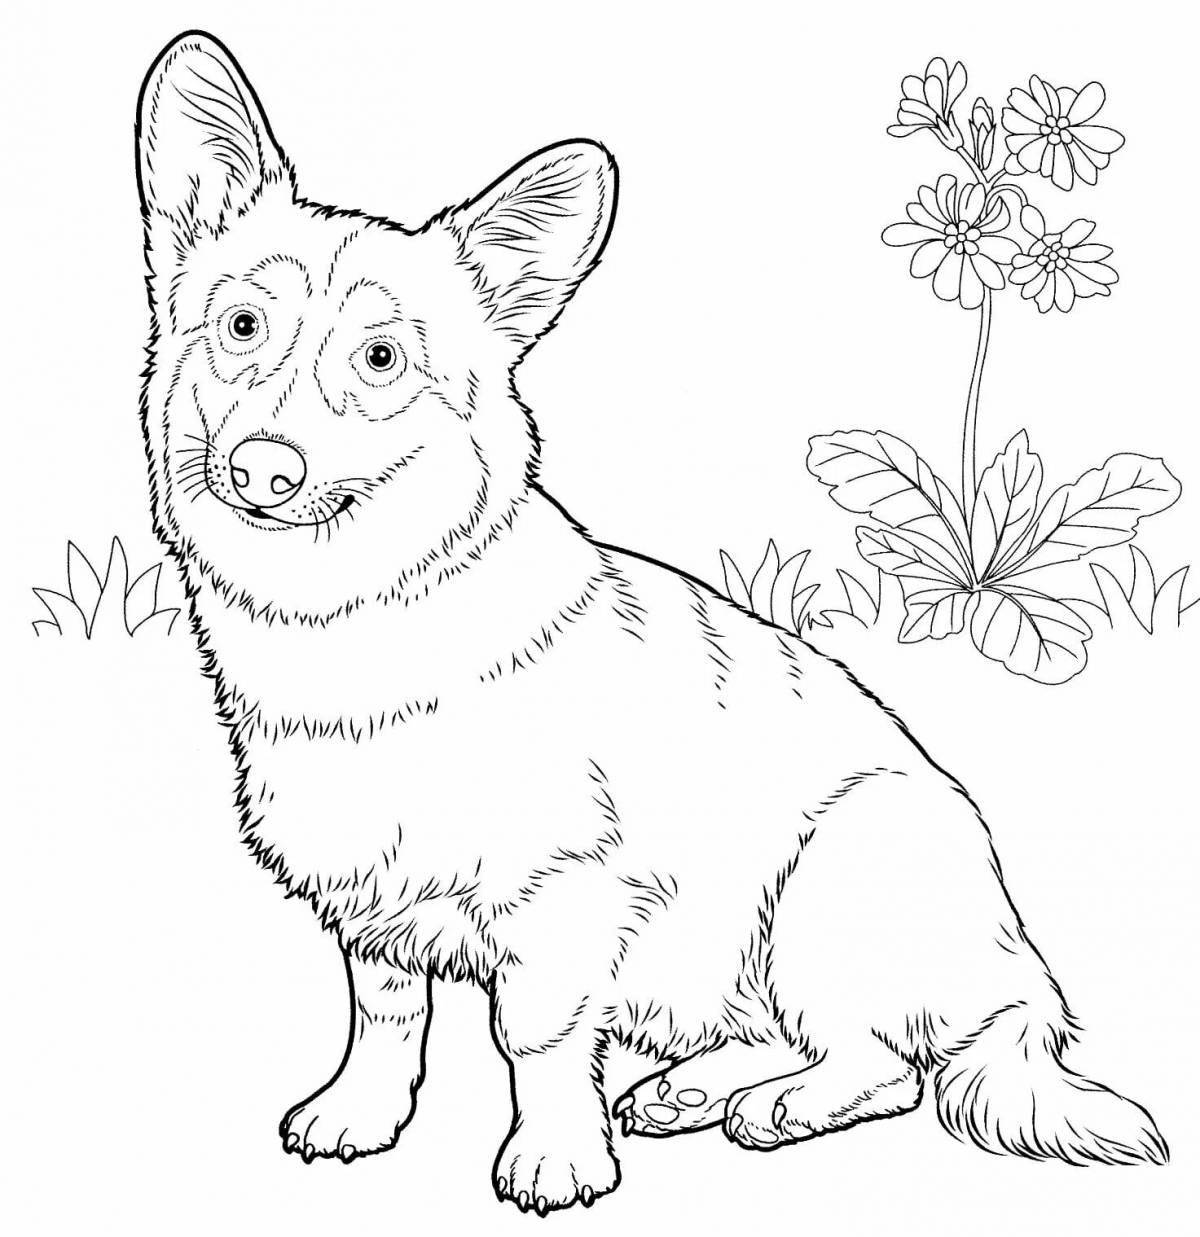 Awesome corgi coloring pages for kids